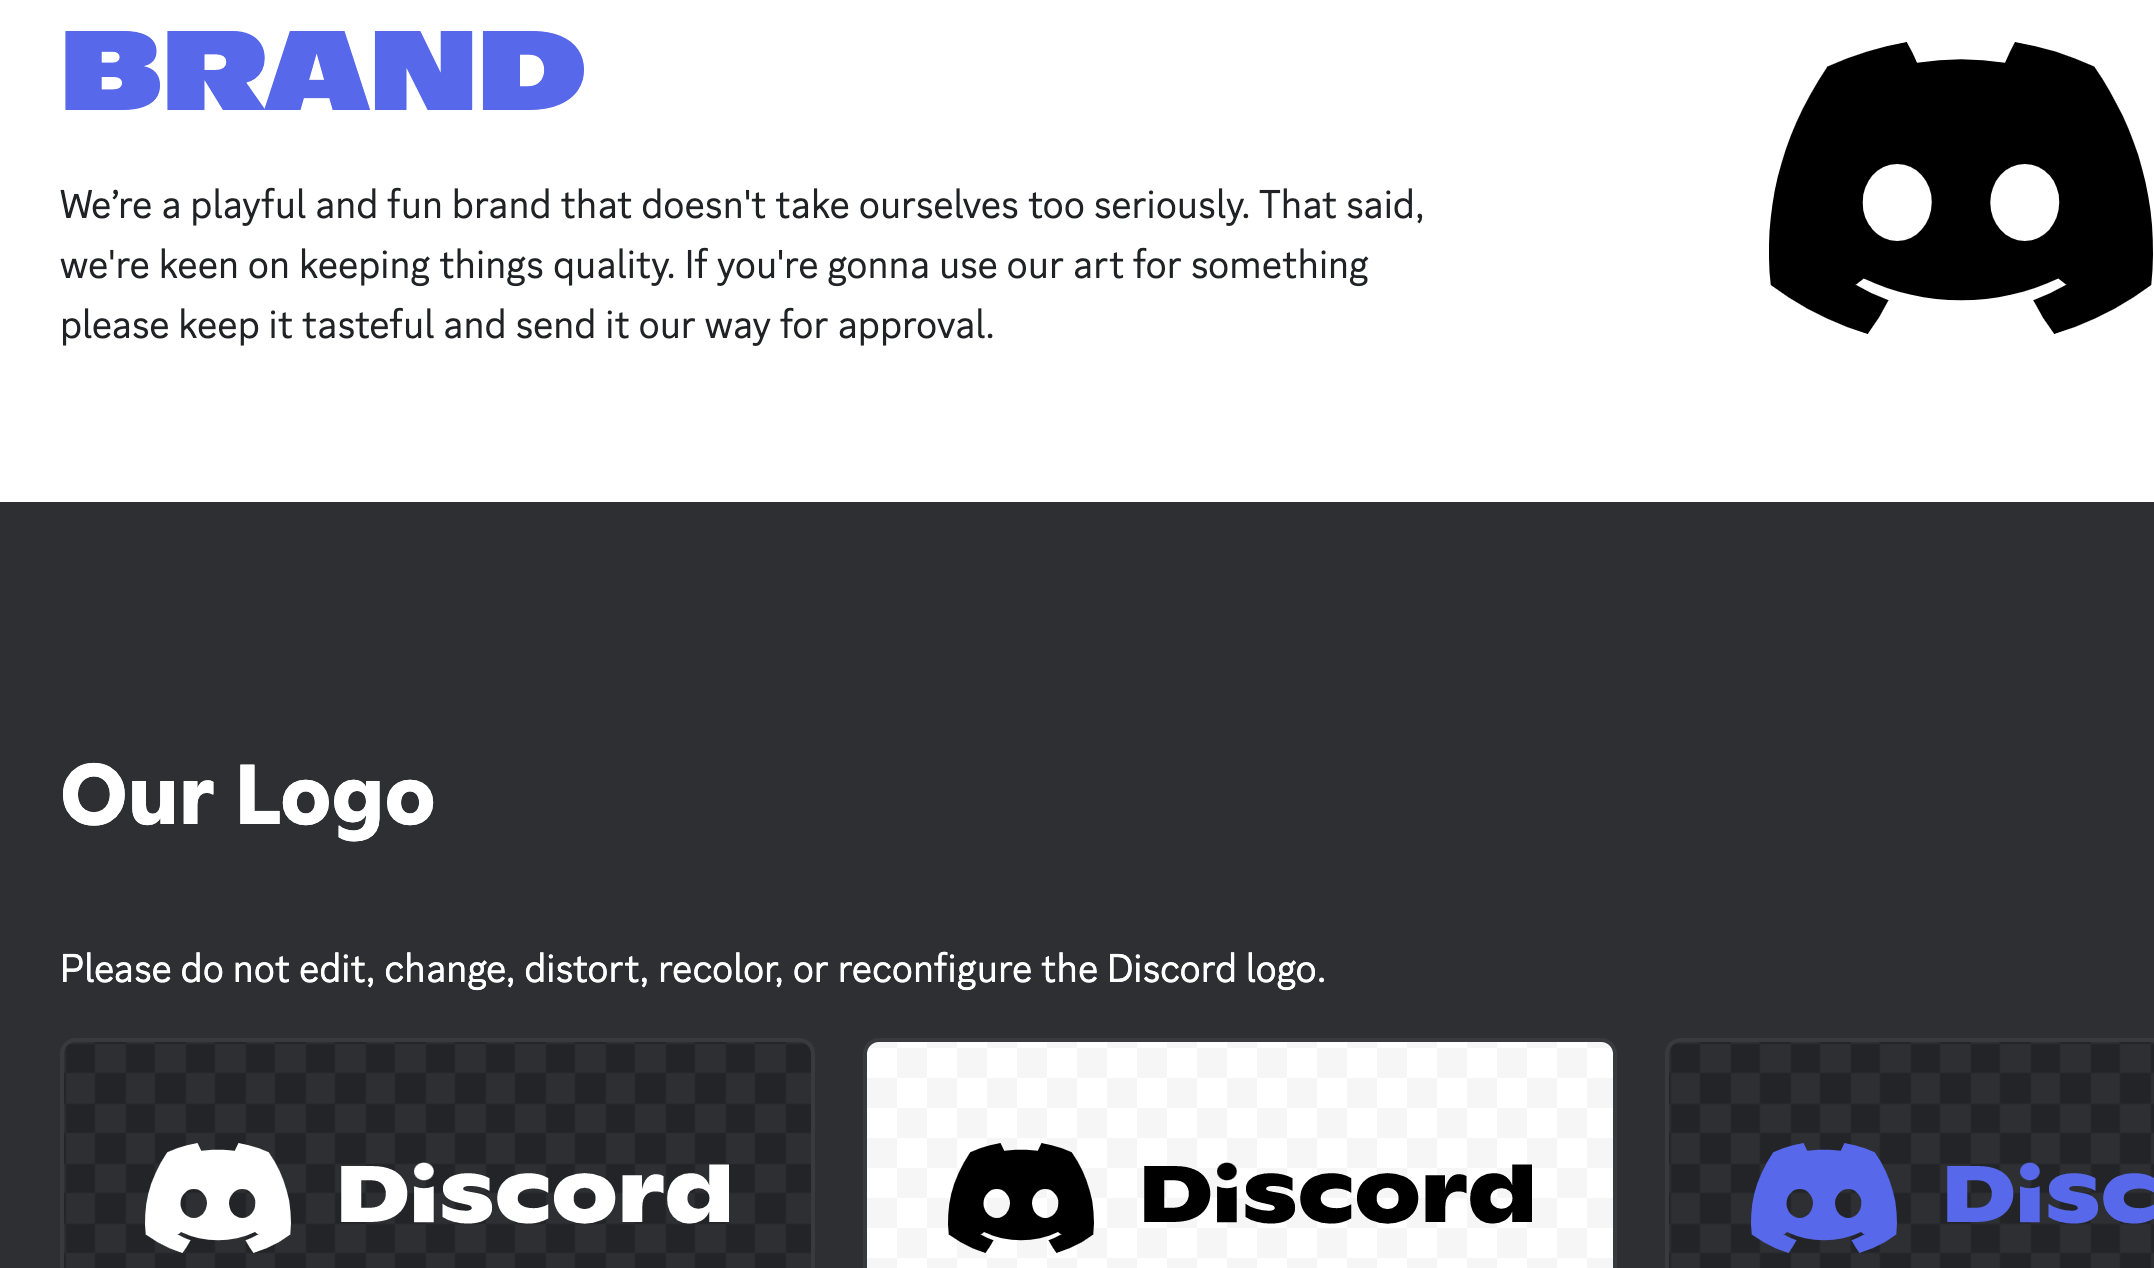 Discord brand guidelines